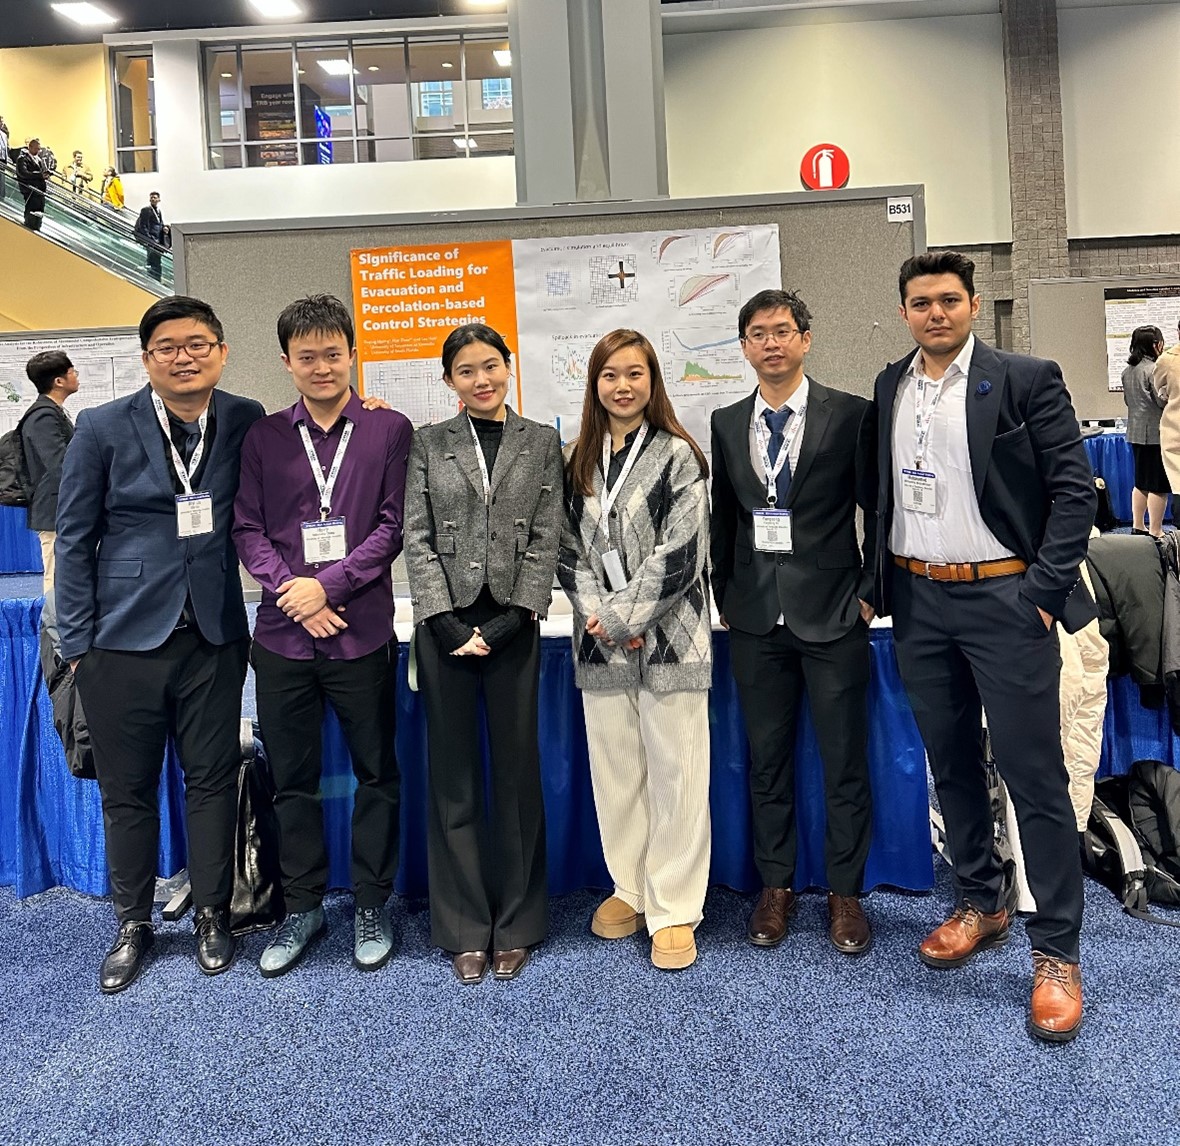 From left to right, Diyi Liu, Hairuilong Zhang, Ruqing Huang, Jinmu Lv, Yangsong Gu, and Mohammad Khojastehpour presenting their research at the 103rd Transportation Research Board Annual Meeting